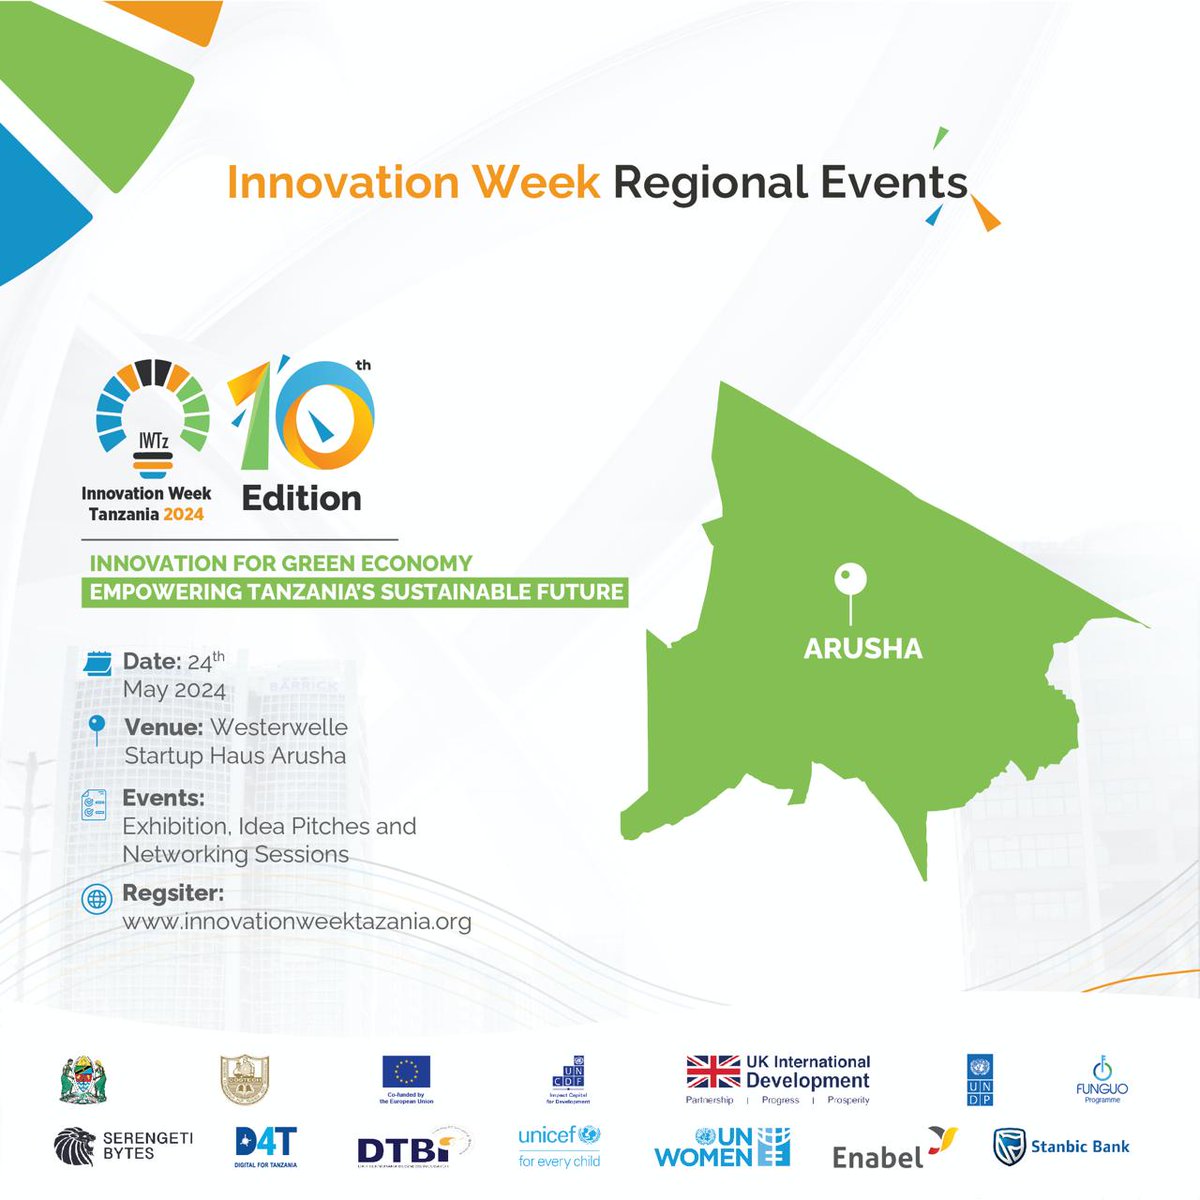 Arusha! Innovation Week Tanzania 2024 will be taking place in Arusha on the 24th of May 2024, at the Westerwelle startup Haus Arusha! Join in on the exhibitions, idea pitches and networking opportunities! Don't miss out on this extraordinary event! IWTz2024 #InnovationWeek